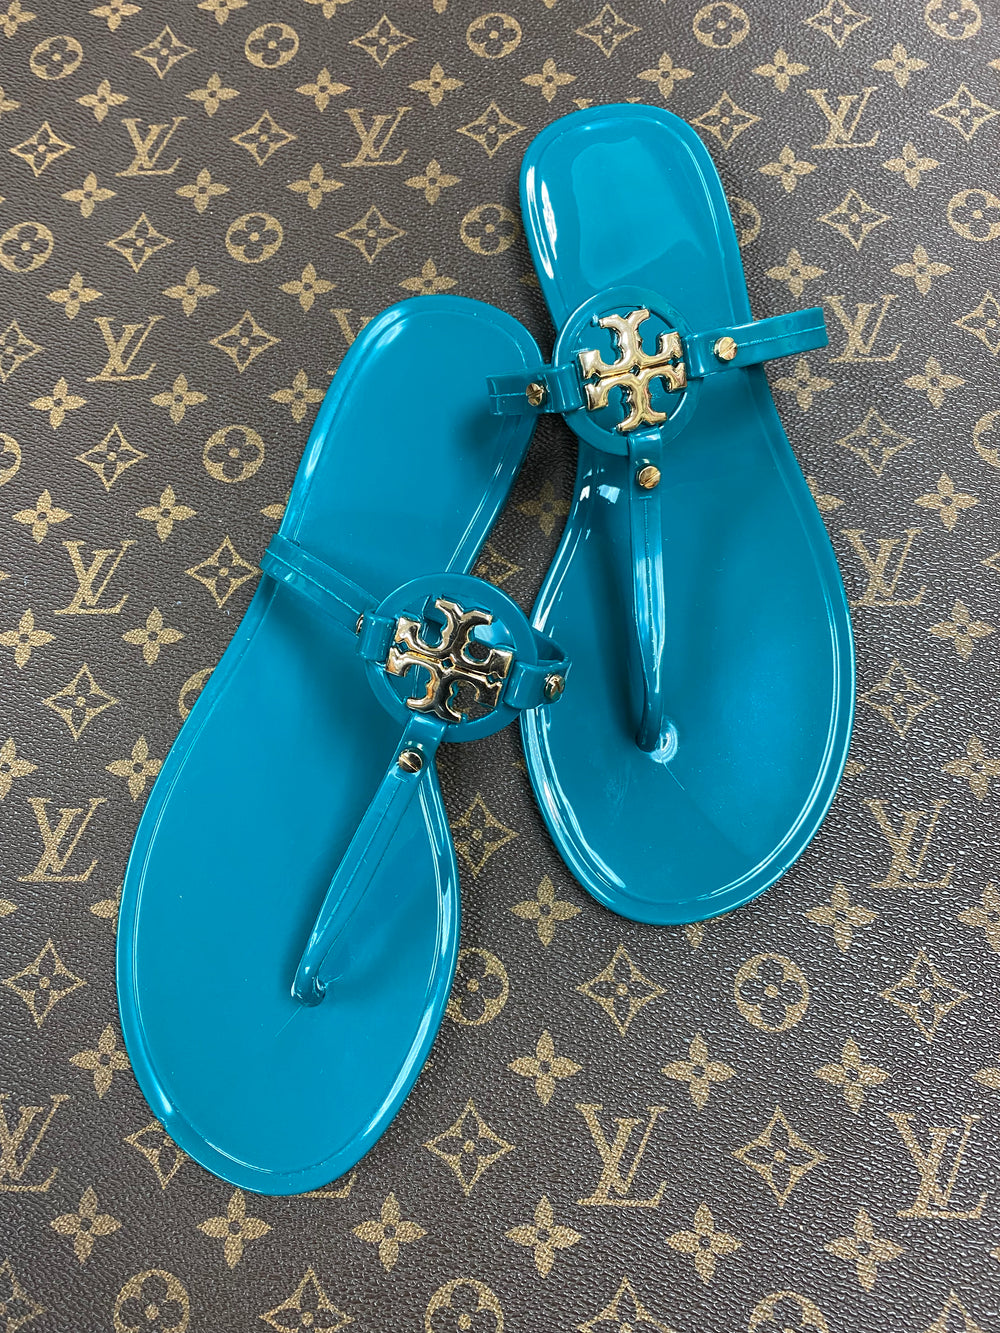 $40 Teal Jelly Sandals